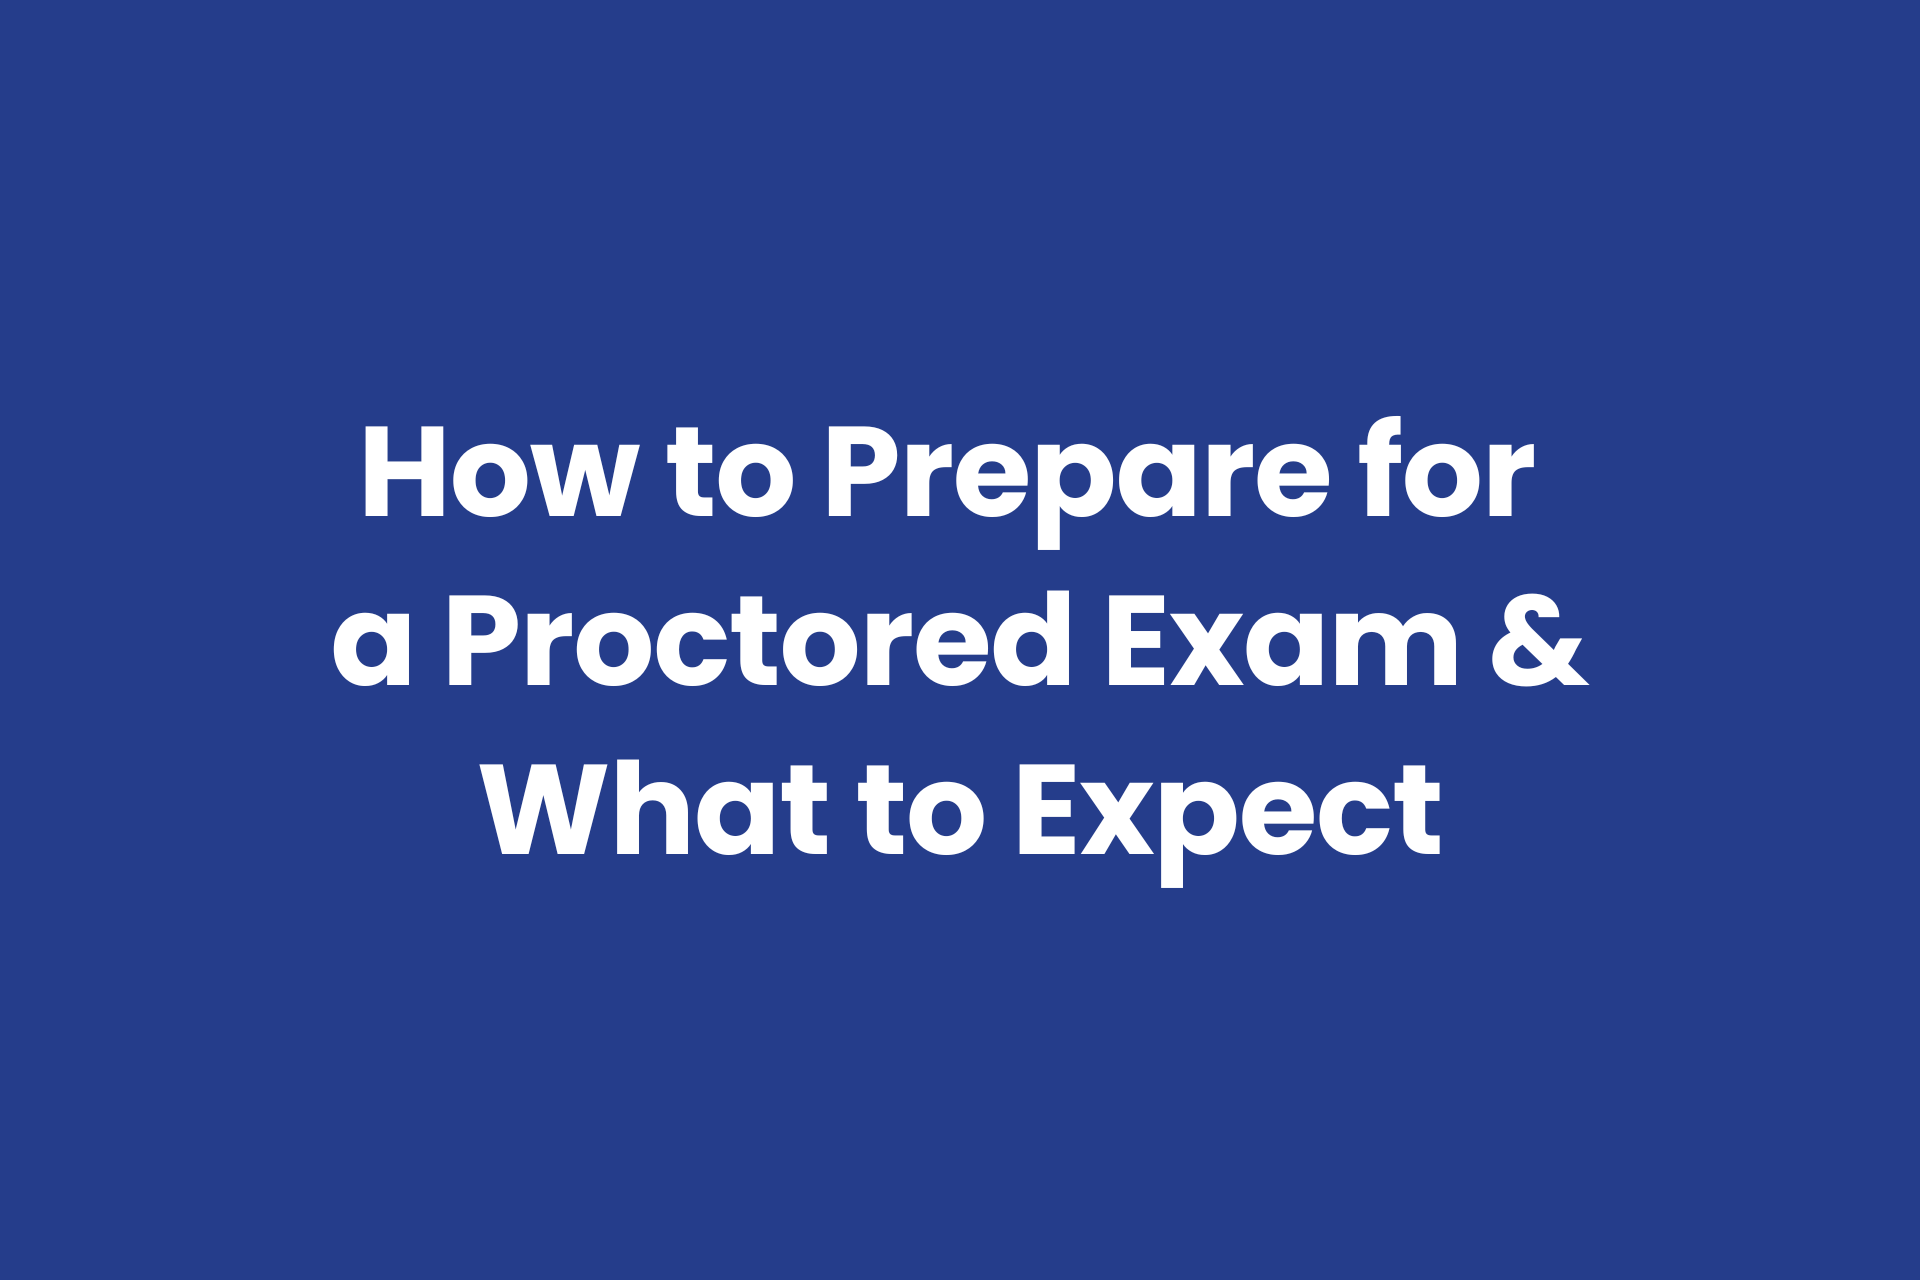 How students can prepare for a proctored exam